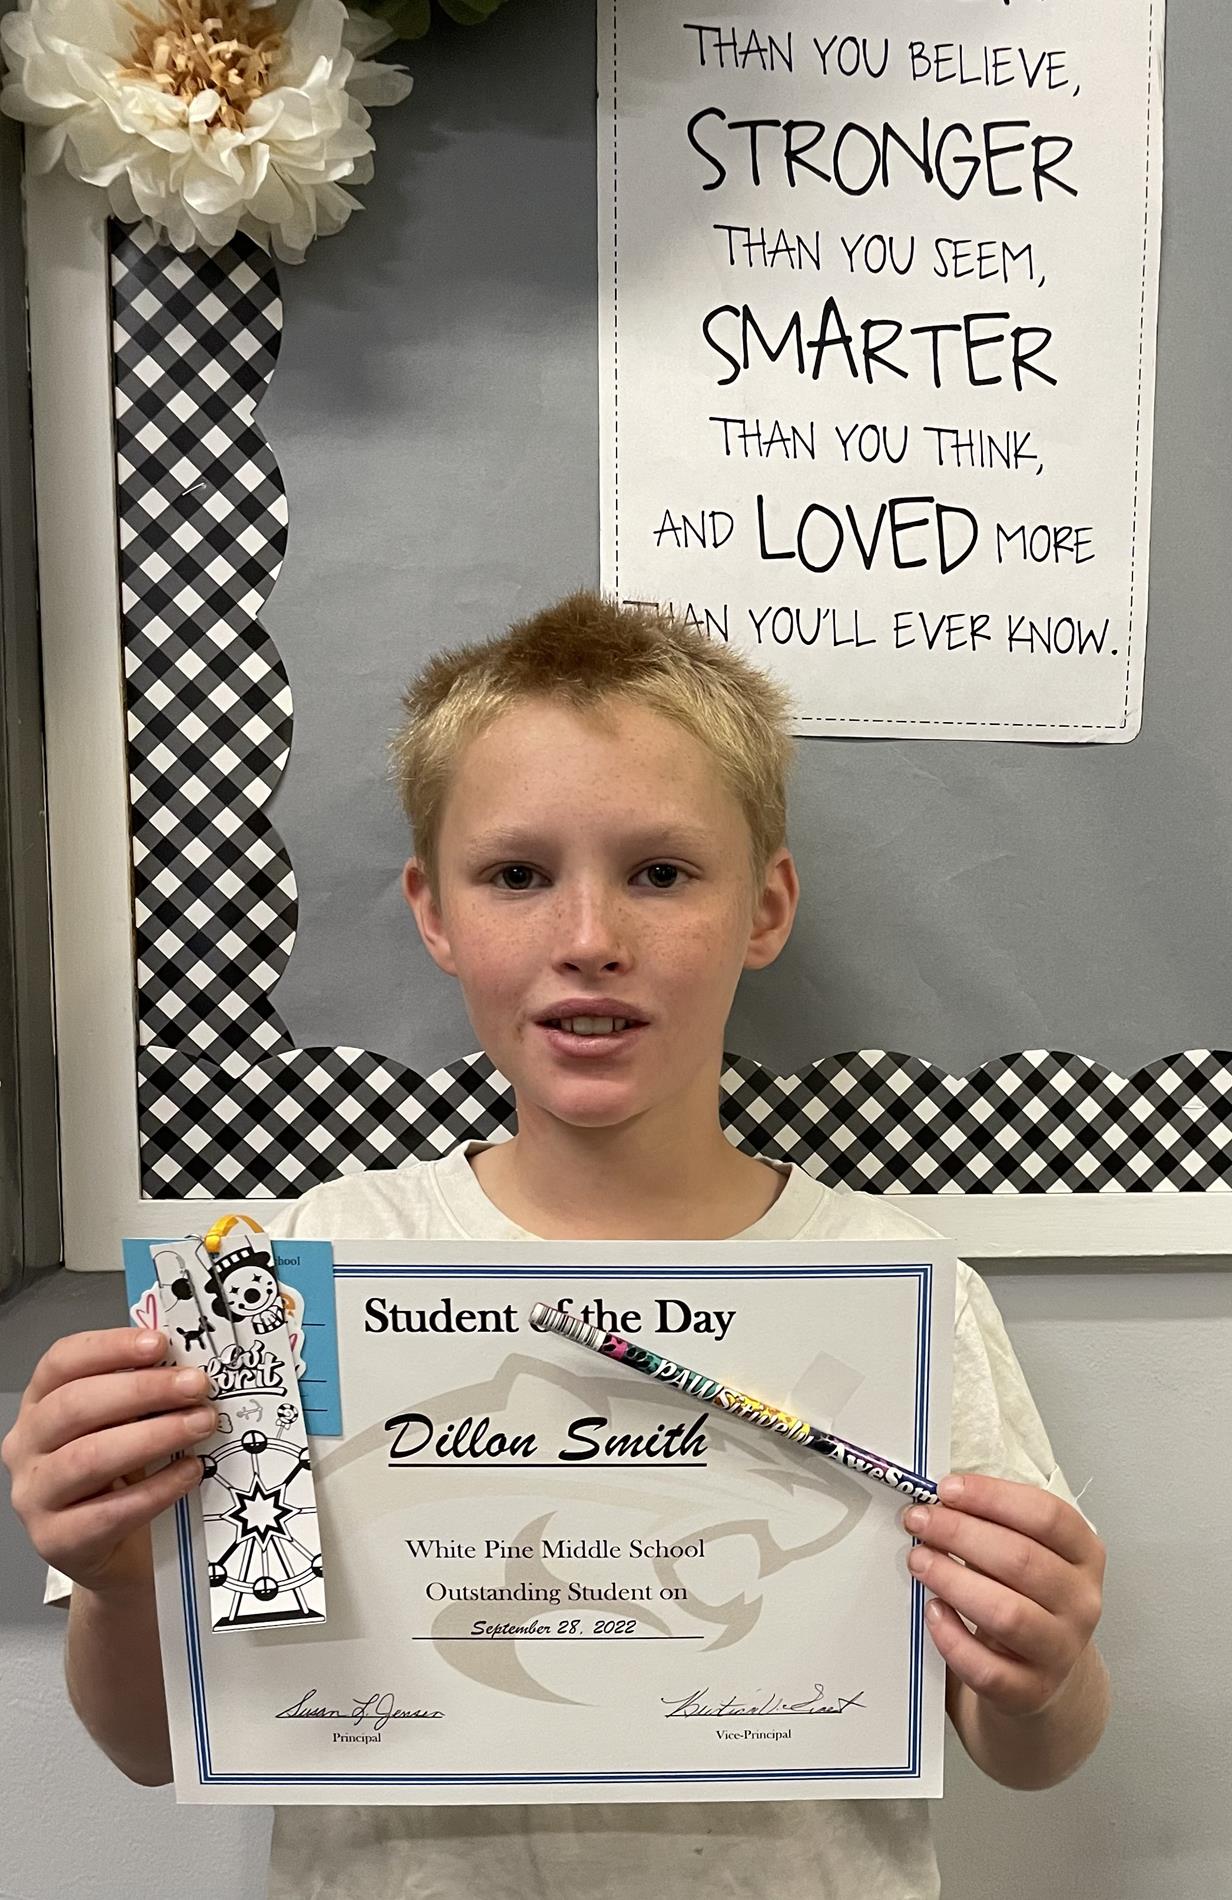 Student of the Day 09/28/22